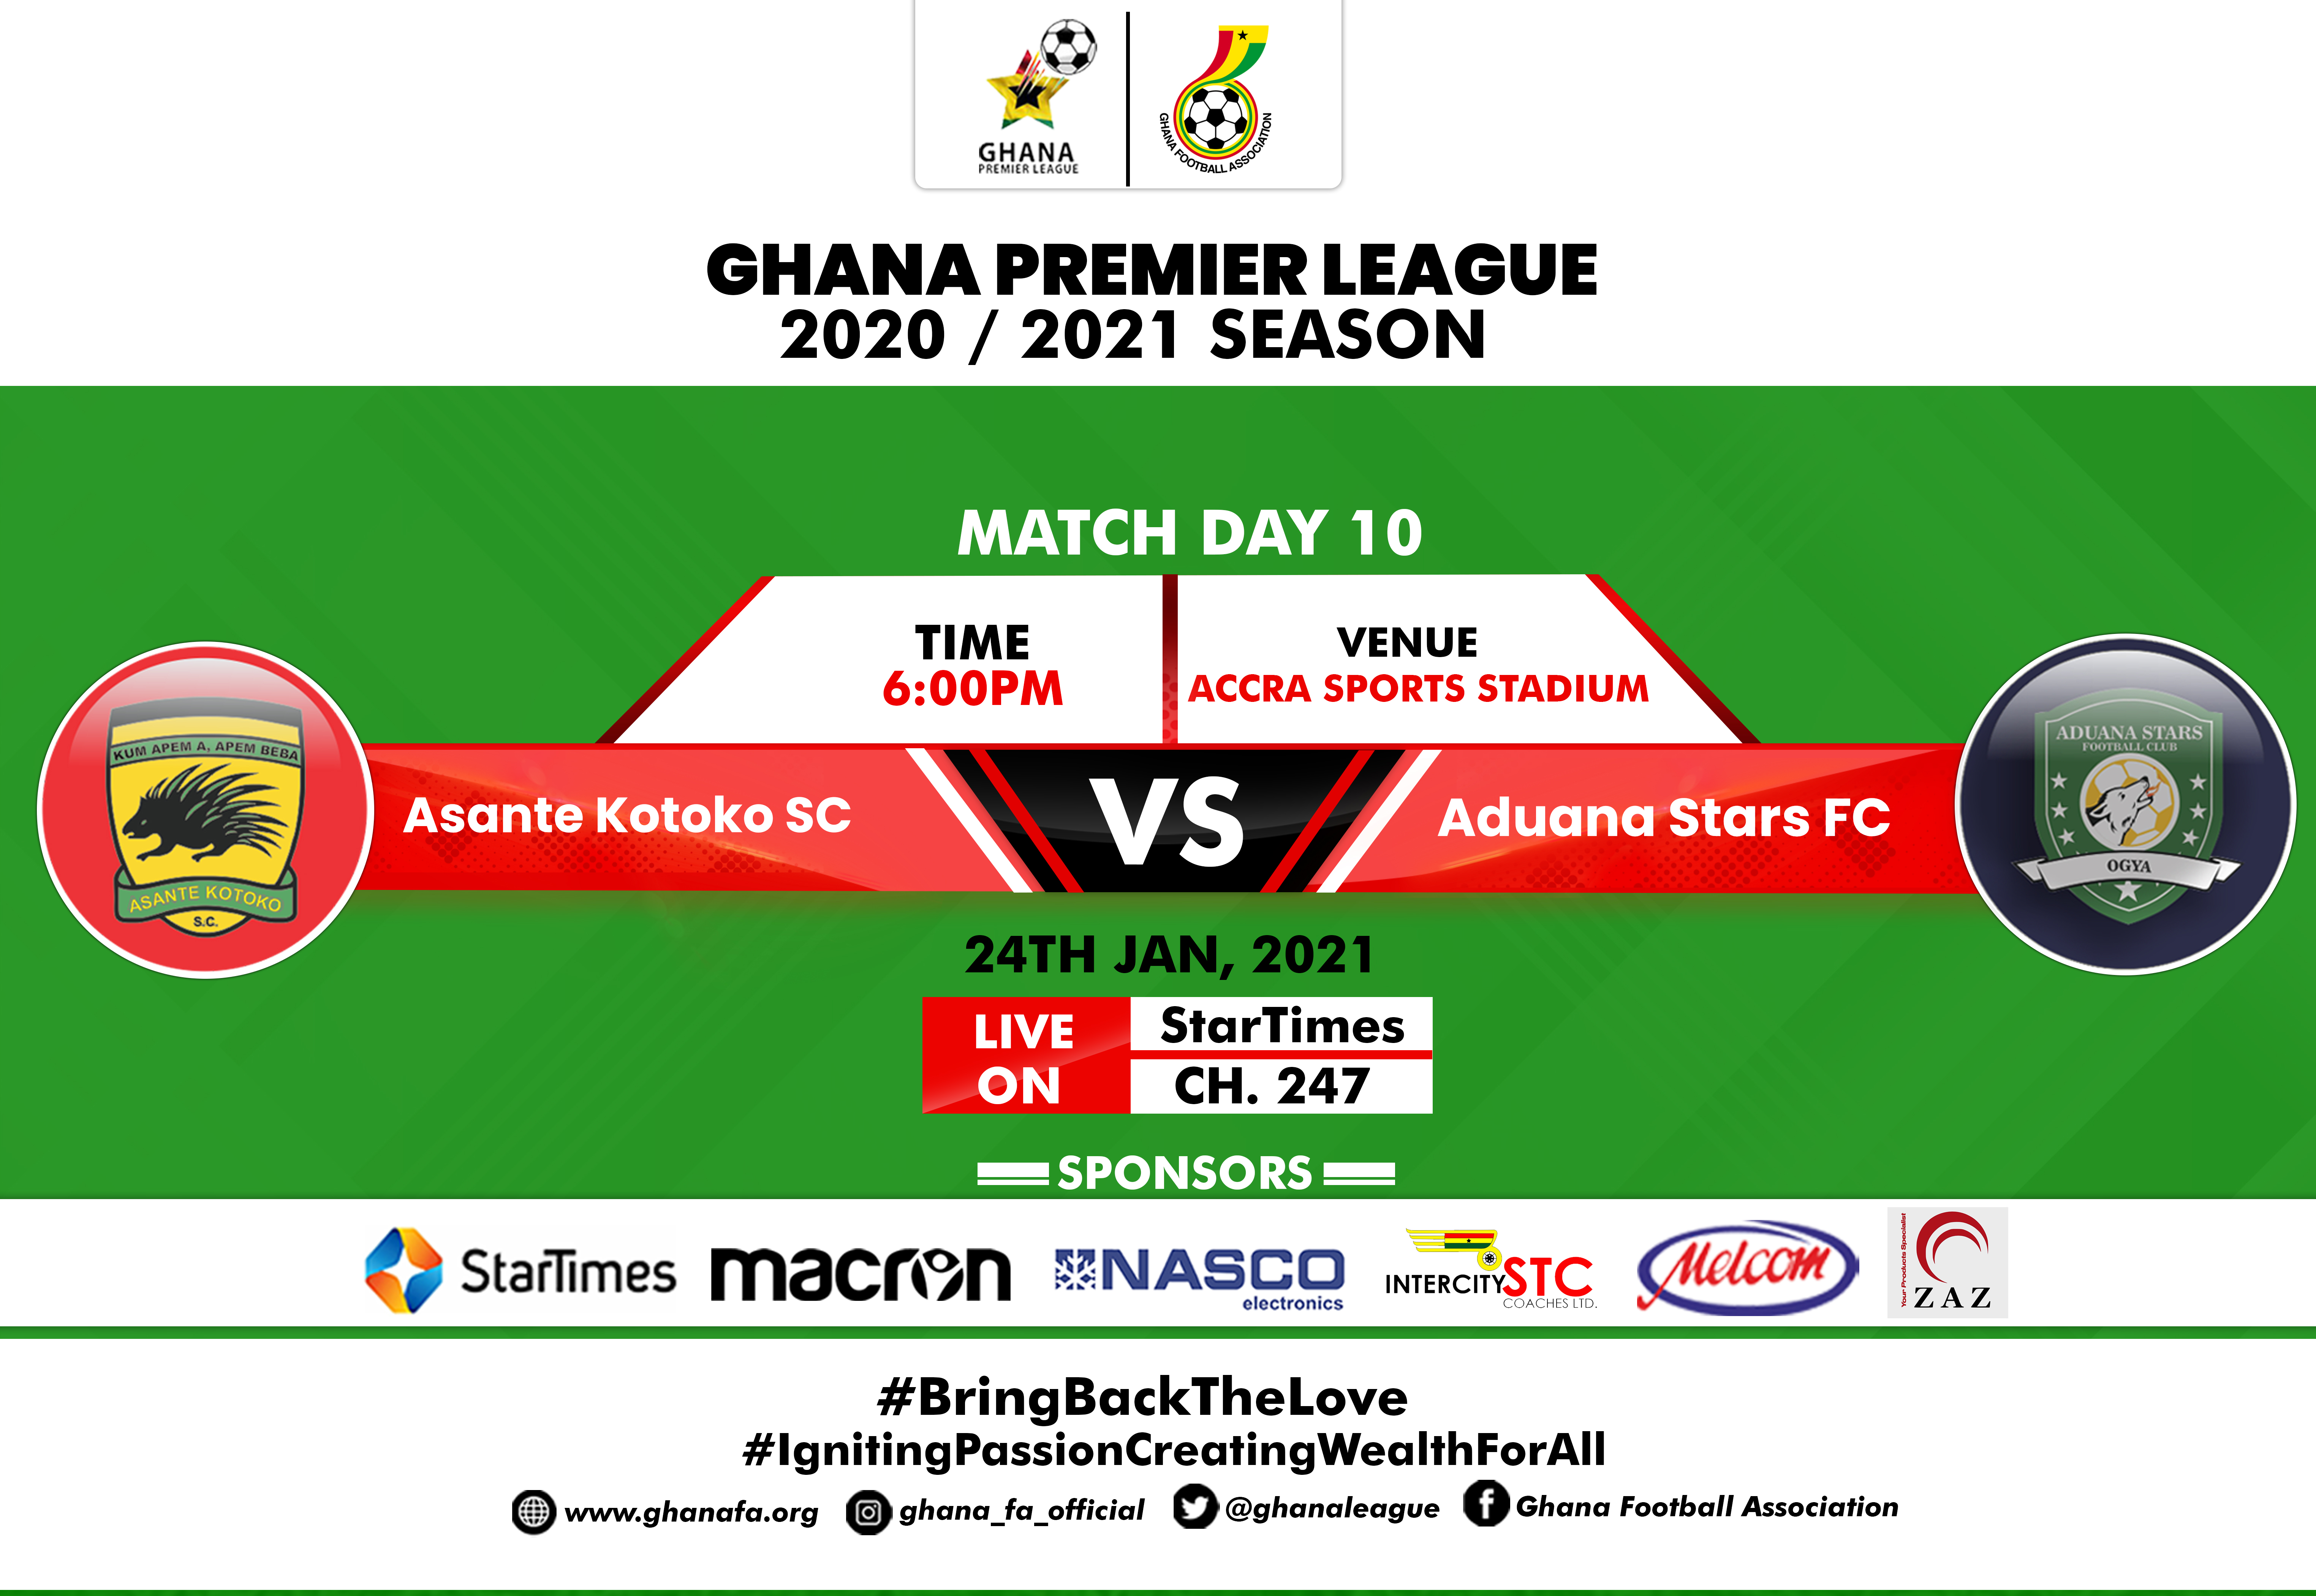 Battle for dominance and clash of personalities: Asante Kotoko vs Aduana Stars - Preview